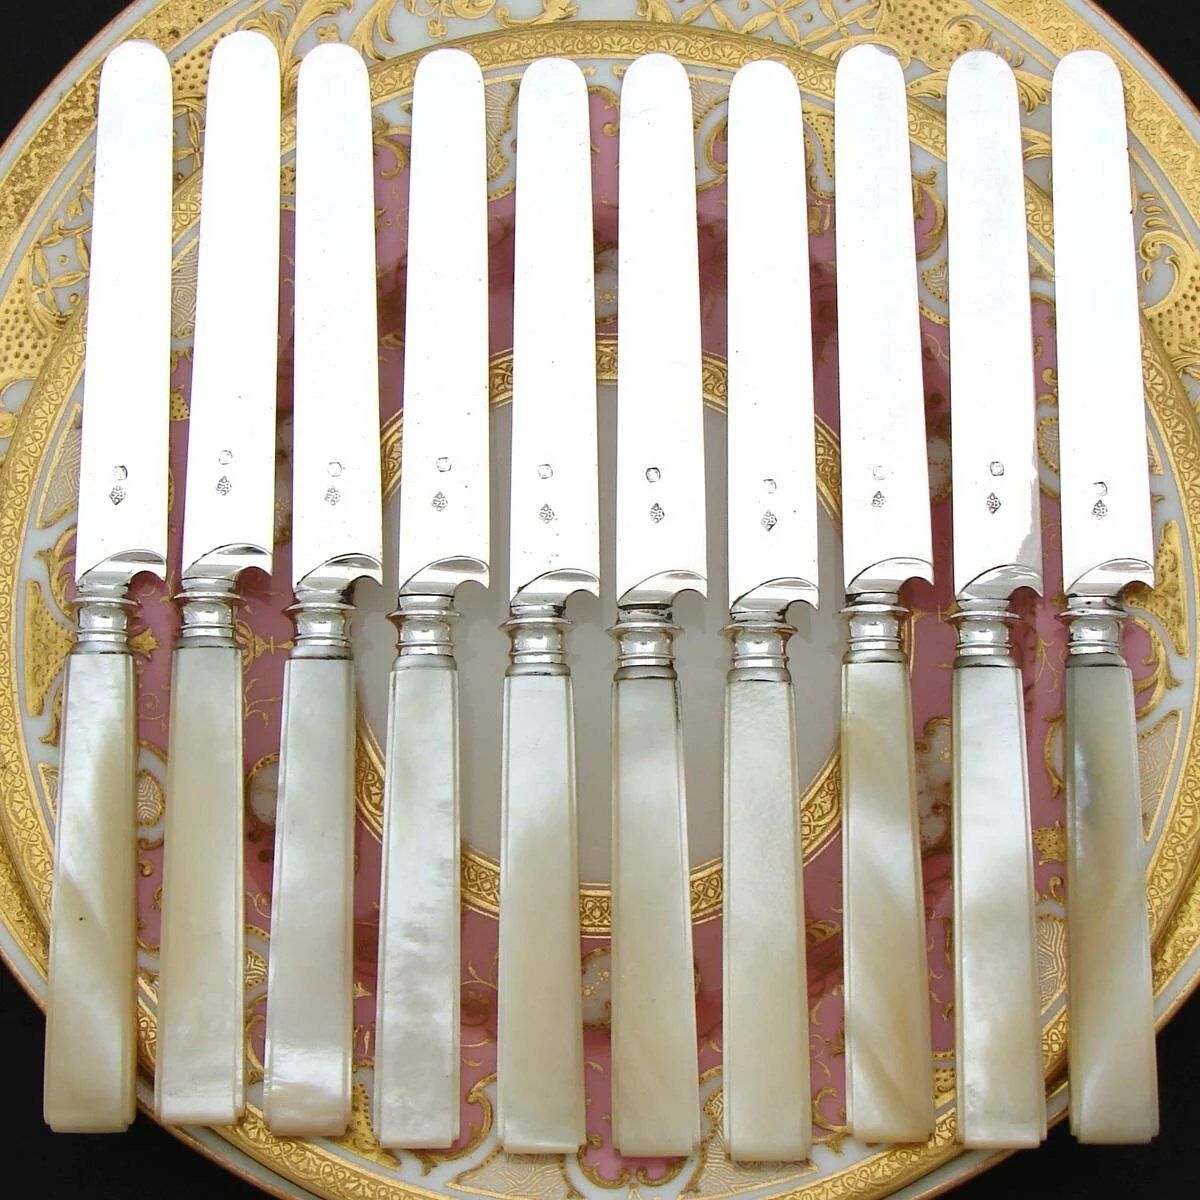 Buy Fruit Knife Set 6 Pcs Laura - Colored Mother of Pearl Cutlery